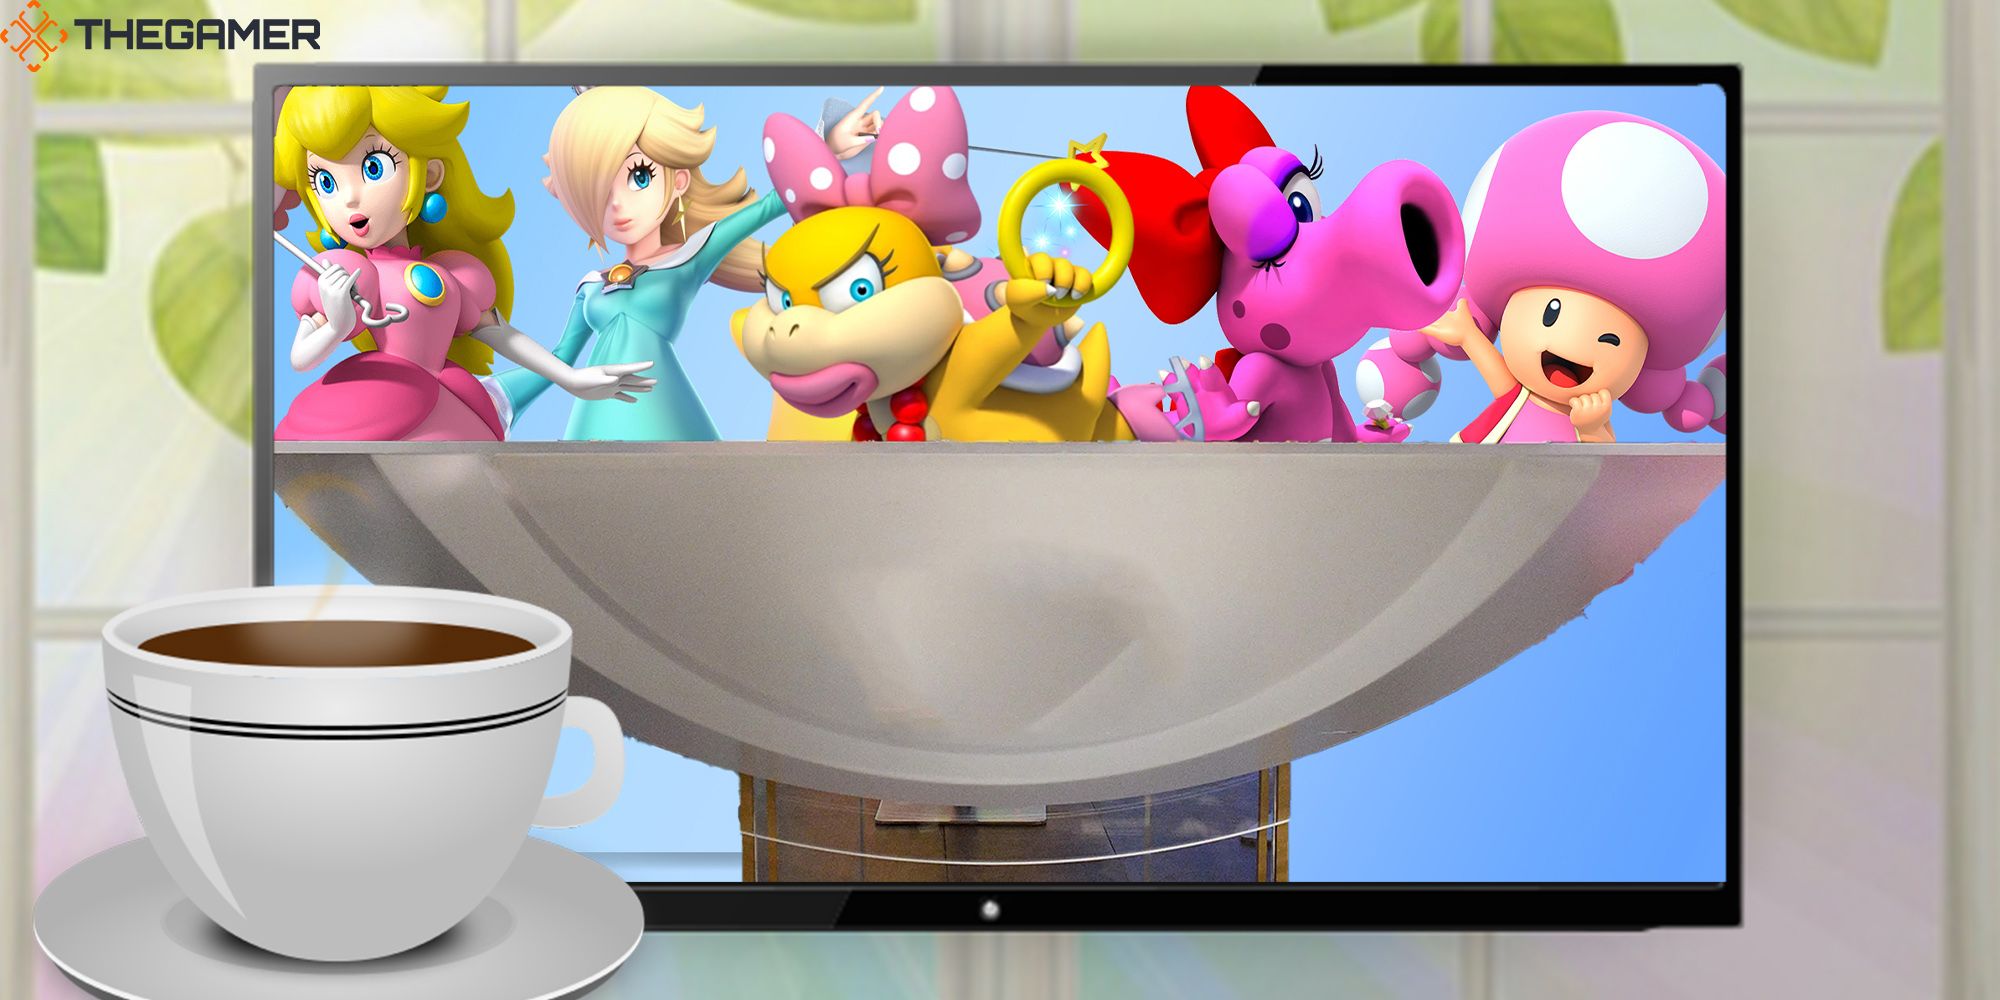 A television set plays a TV show starring Peach, Rosalina, Wendy O Bowser, Birdo, and Toadette while a cup of coffee steams on a kitchen counter.